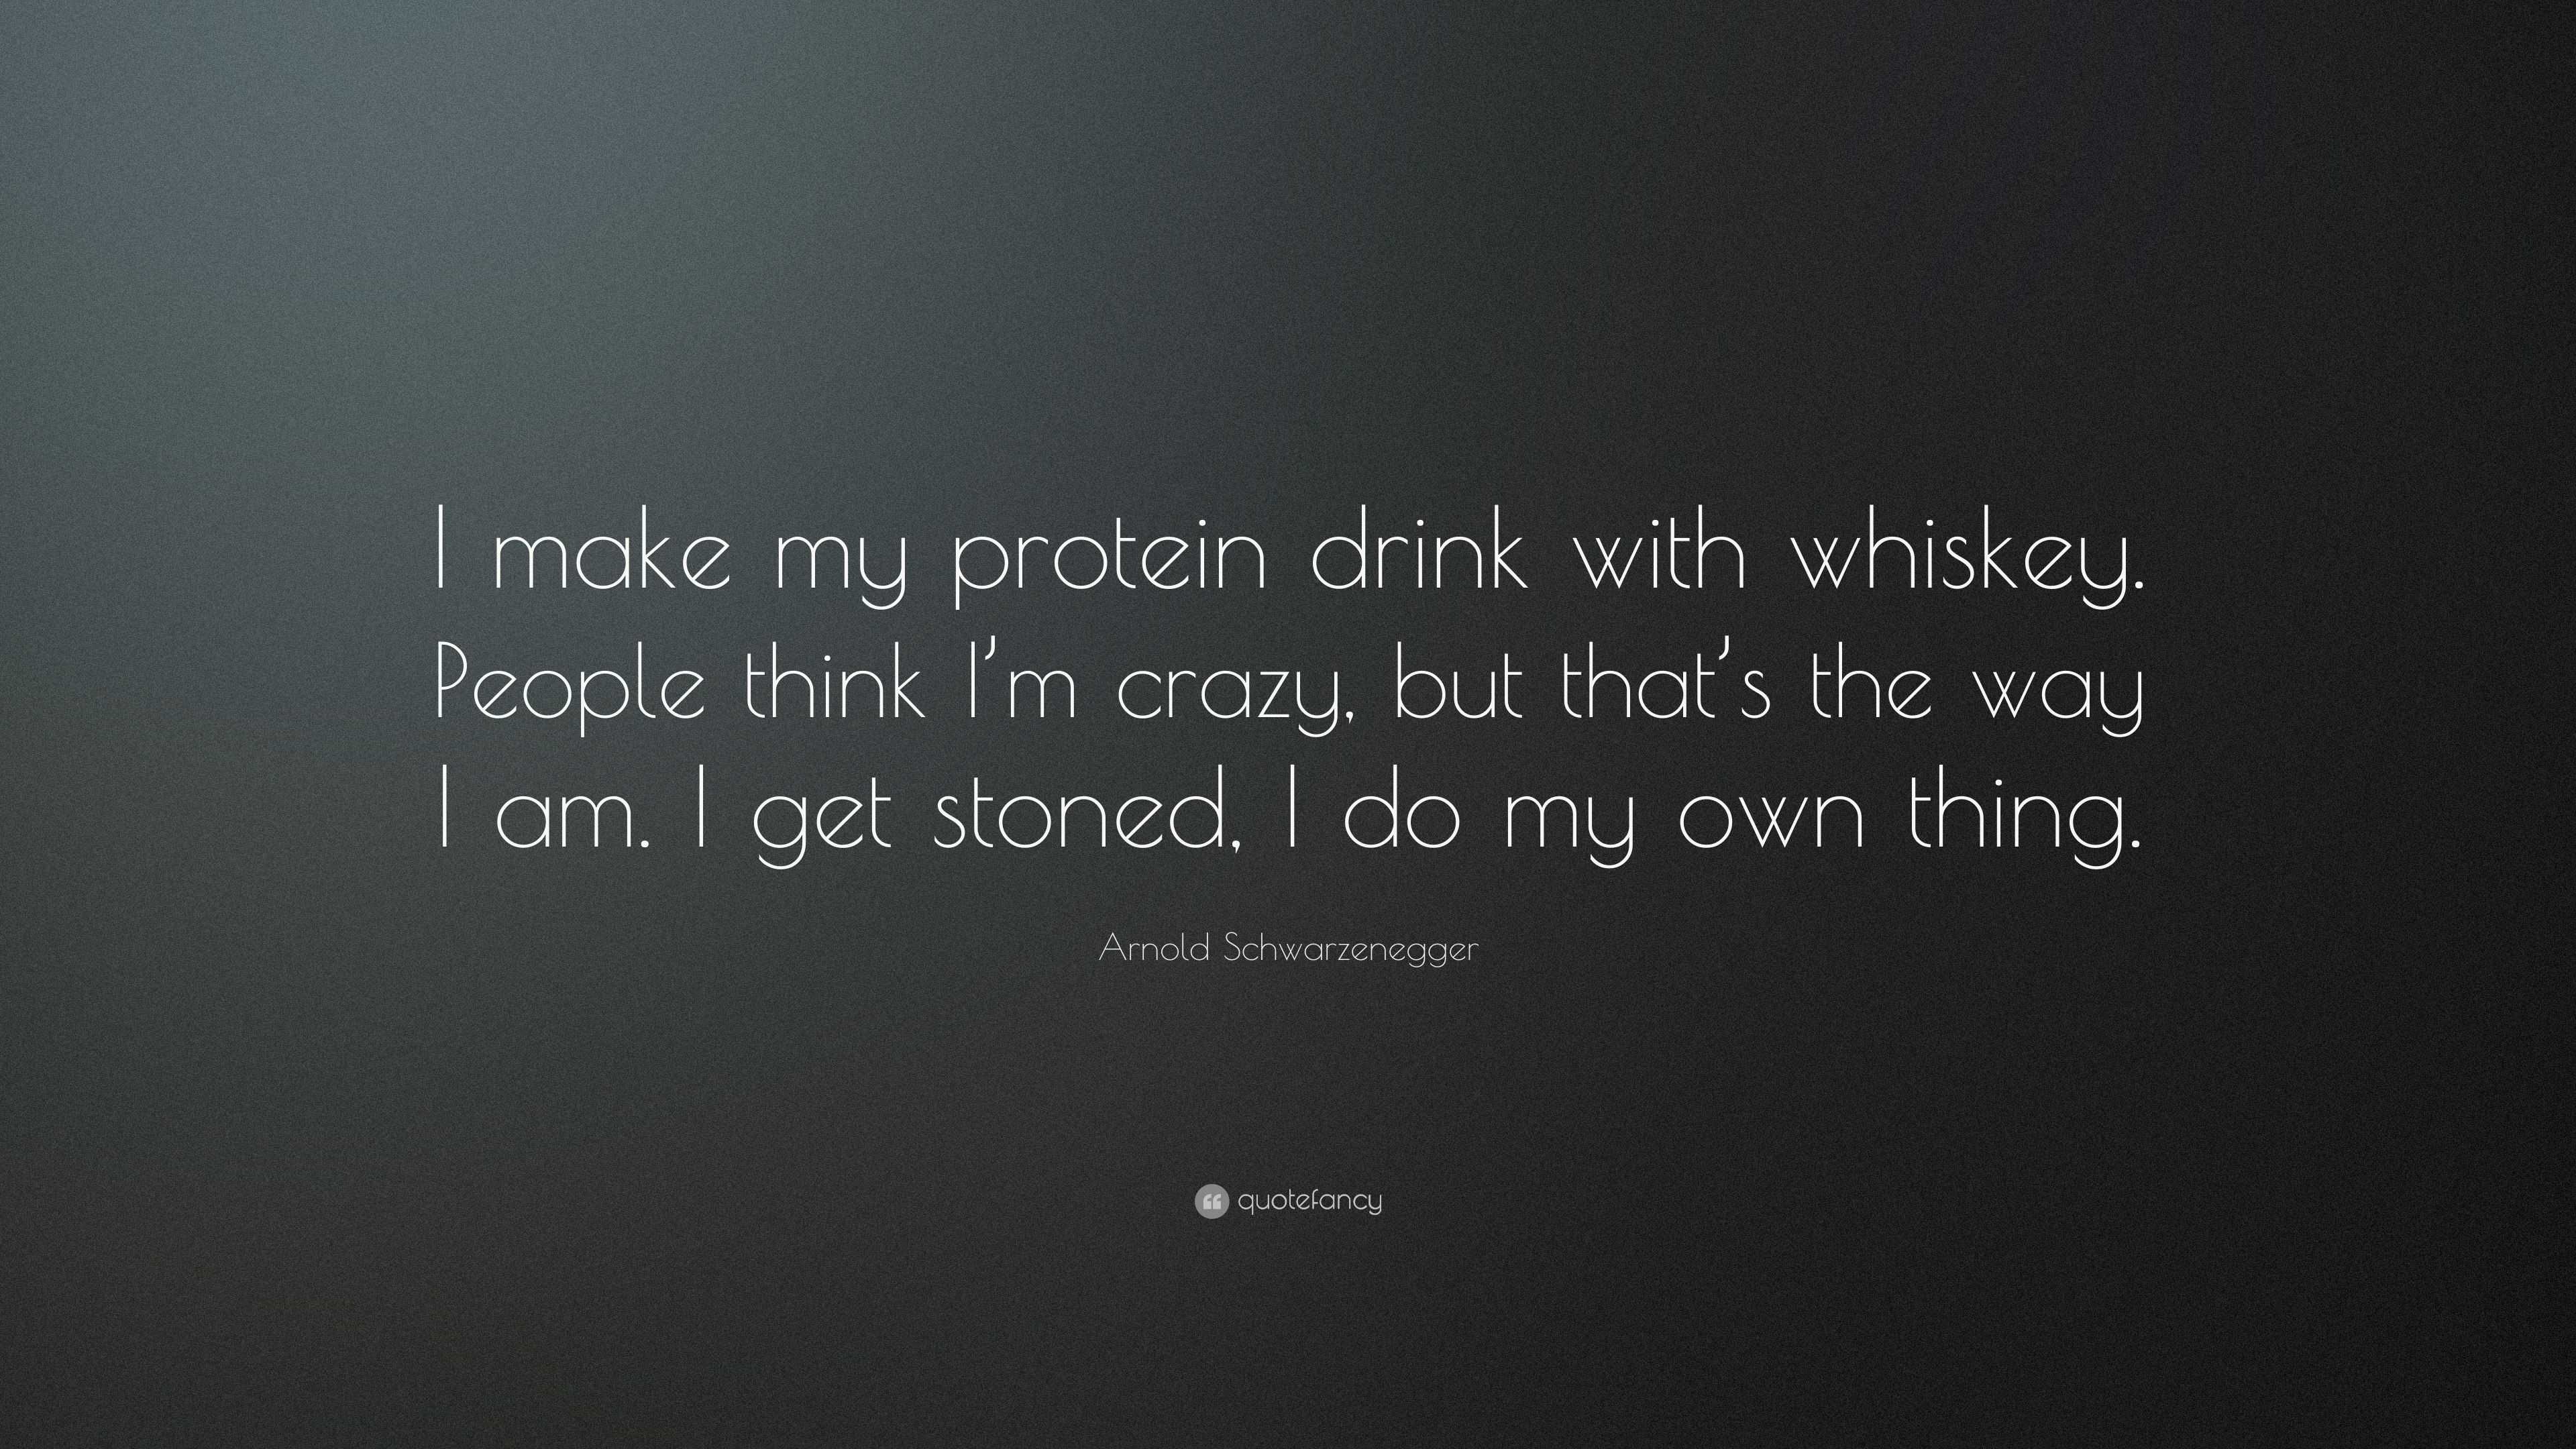 https://quotefancy.com/media/wallpaper/3840x2160/4729479-Arnold-Schwarzenegger-Quote-I-make-my-protein-drink-with-whiskey.jpg